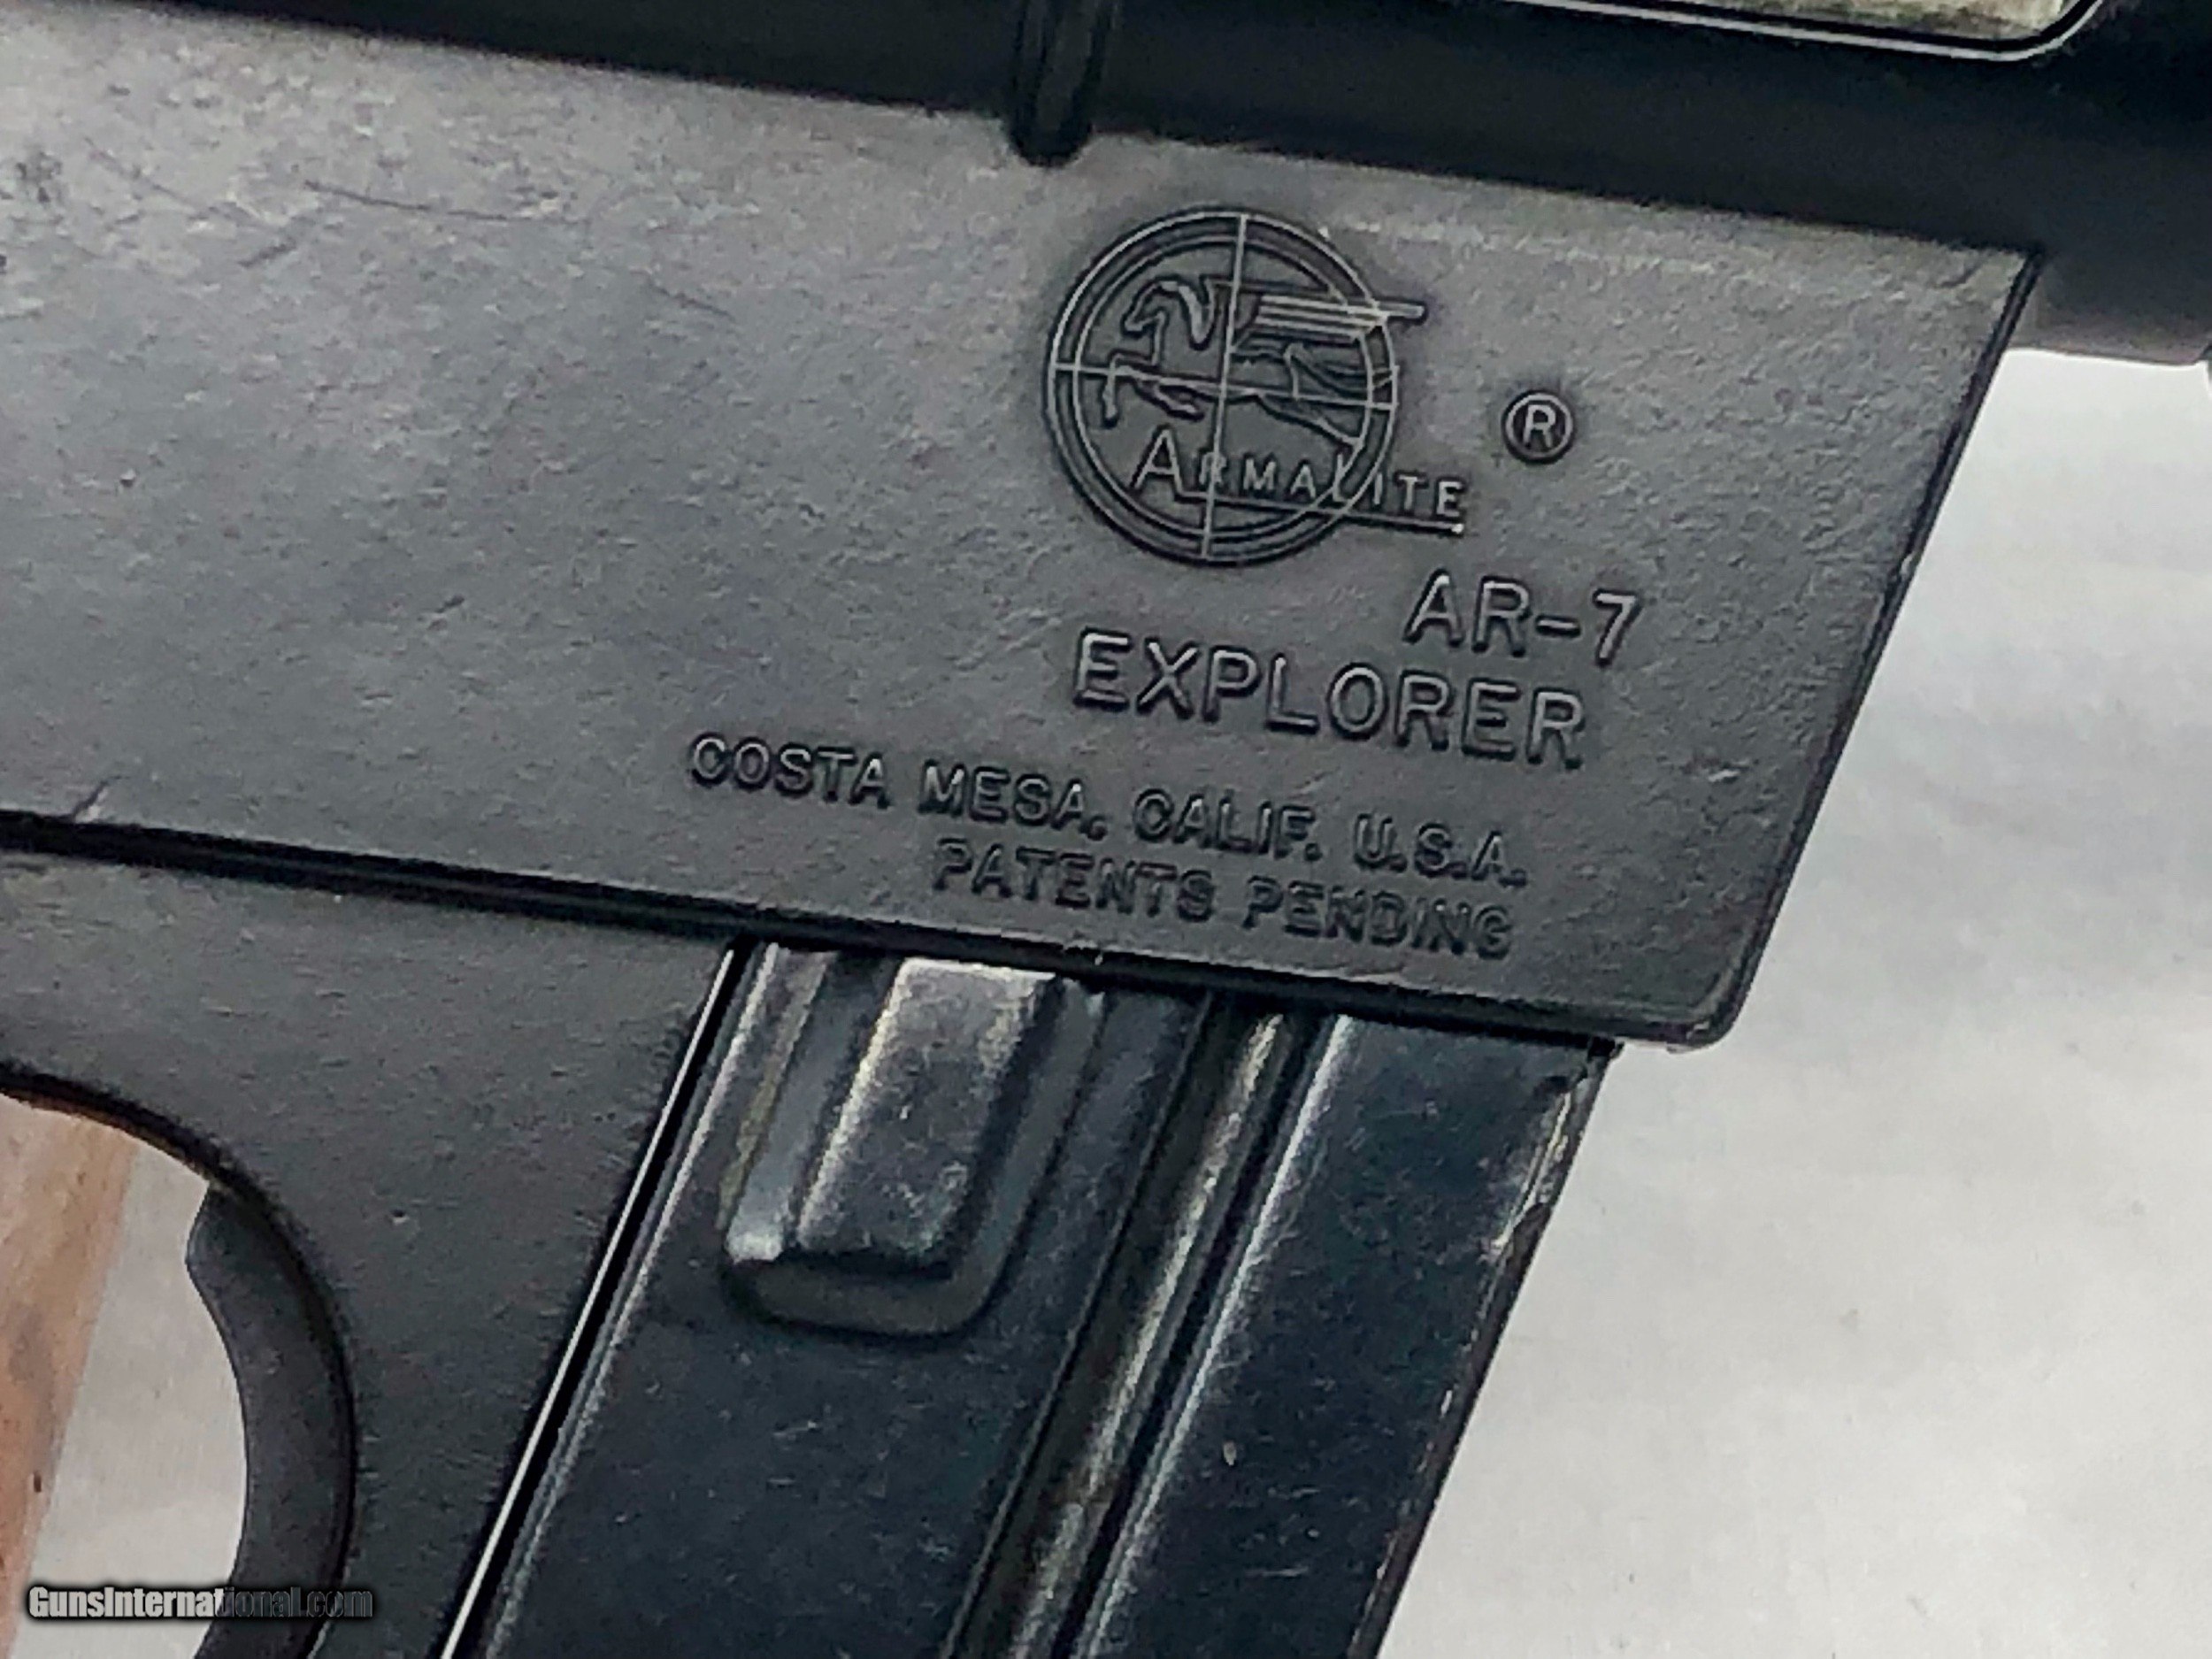 Charter arms ar7 serial numbers